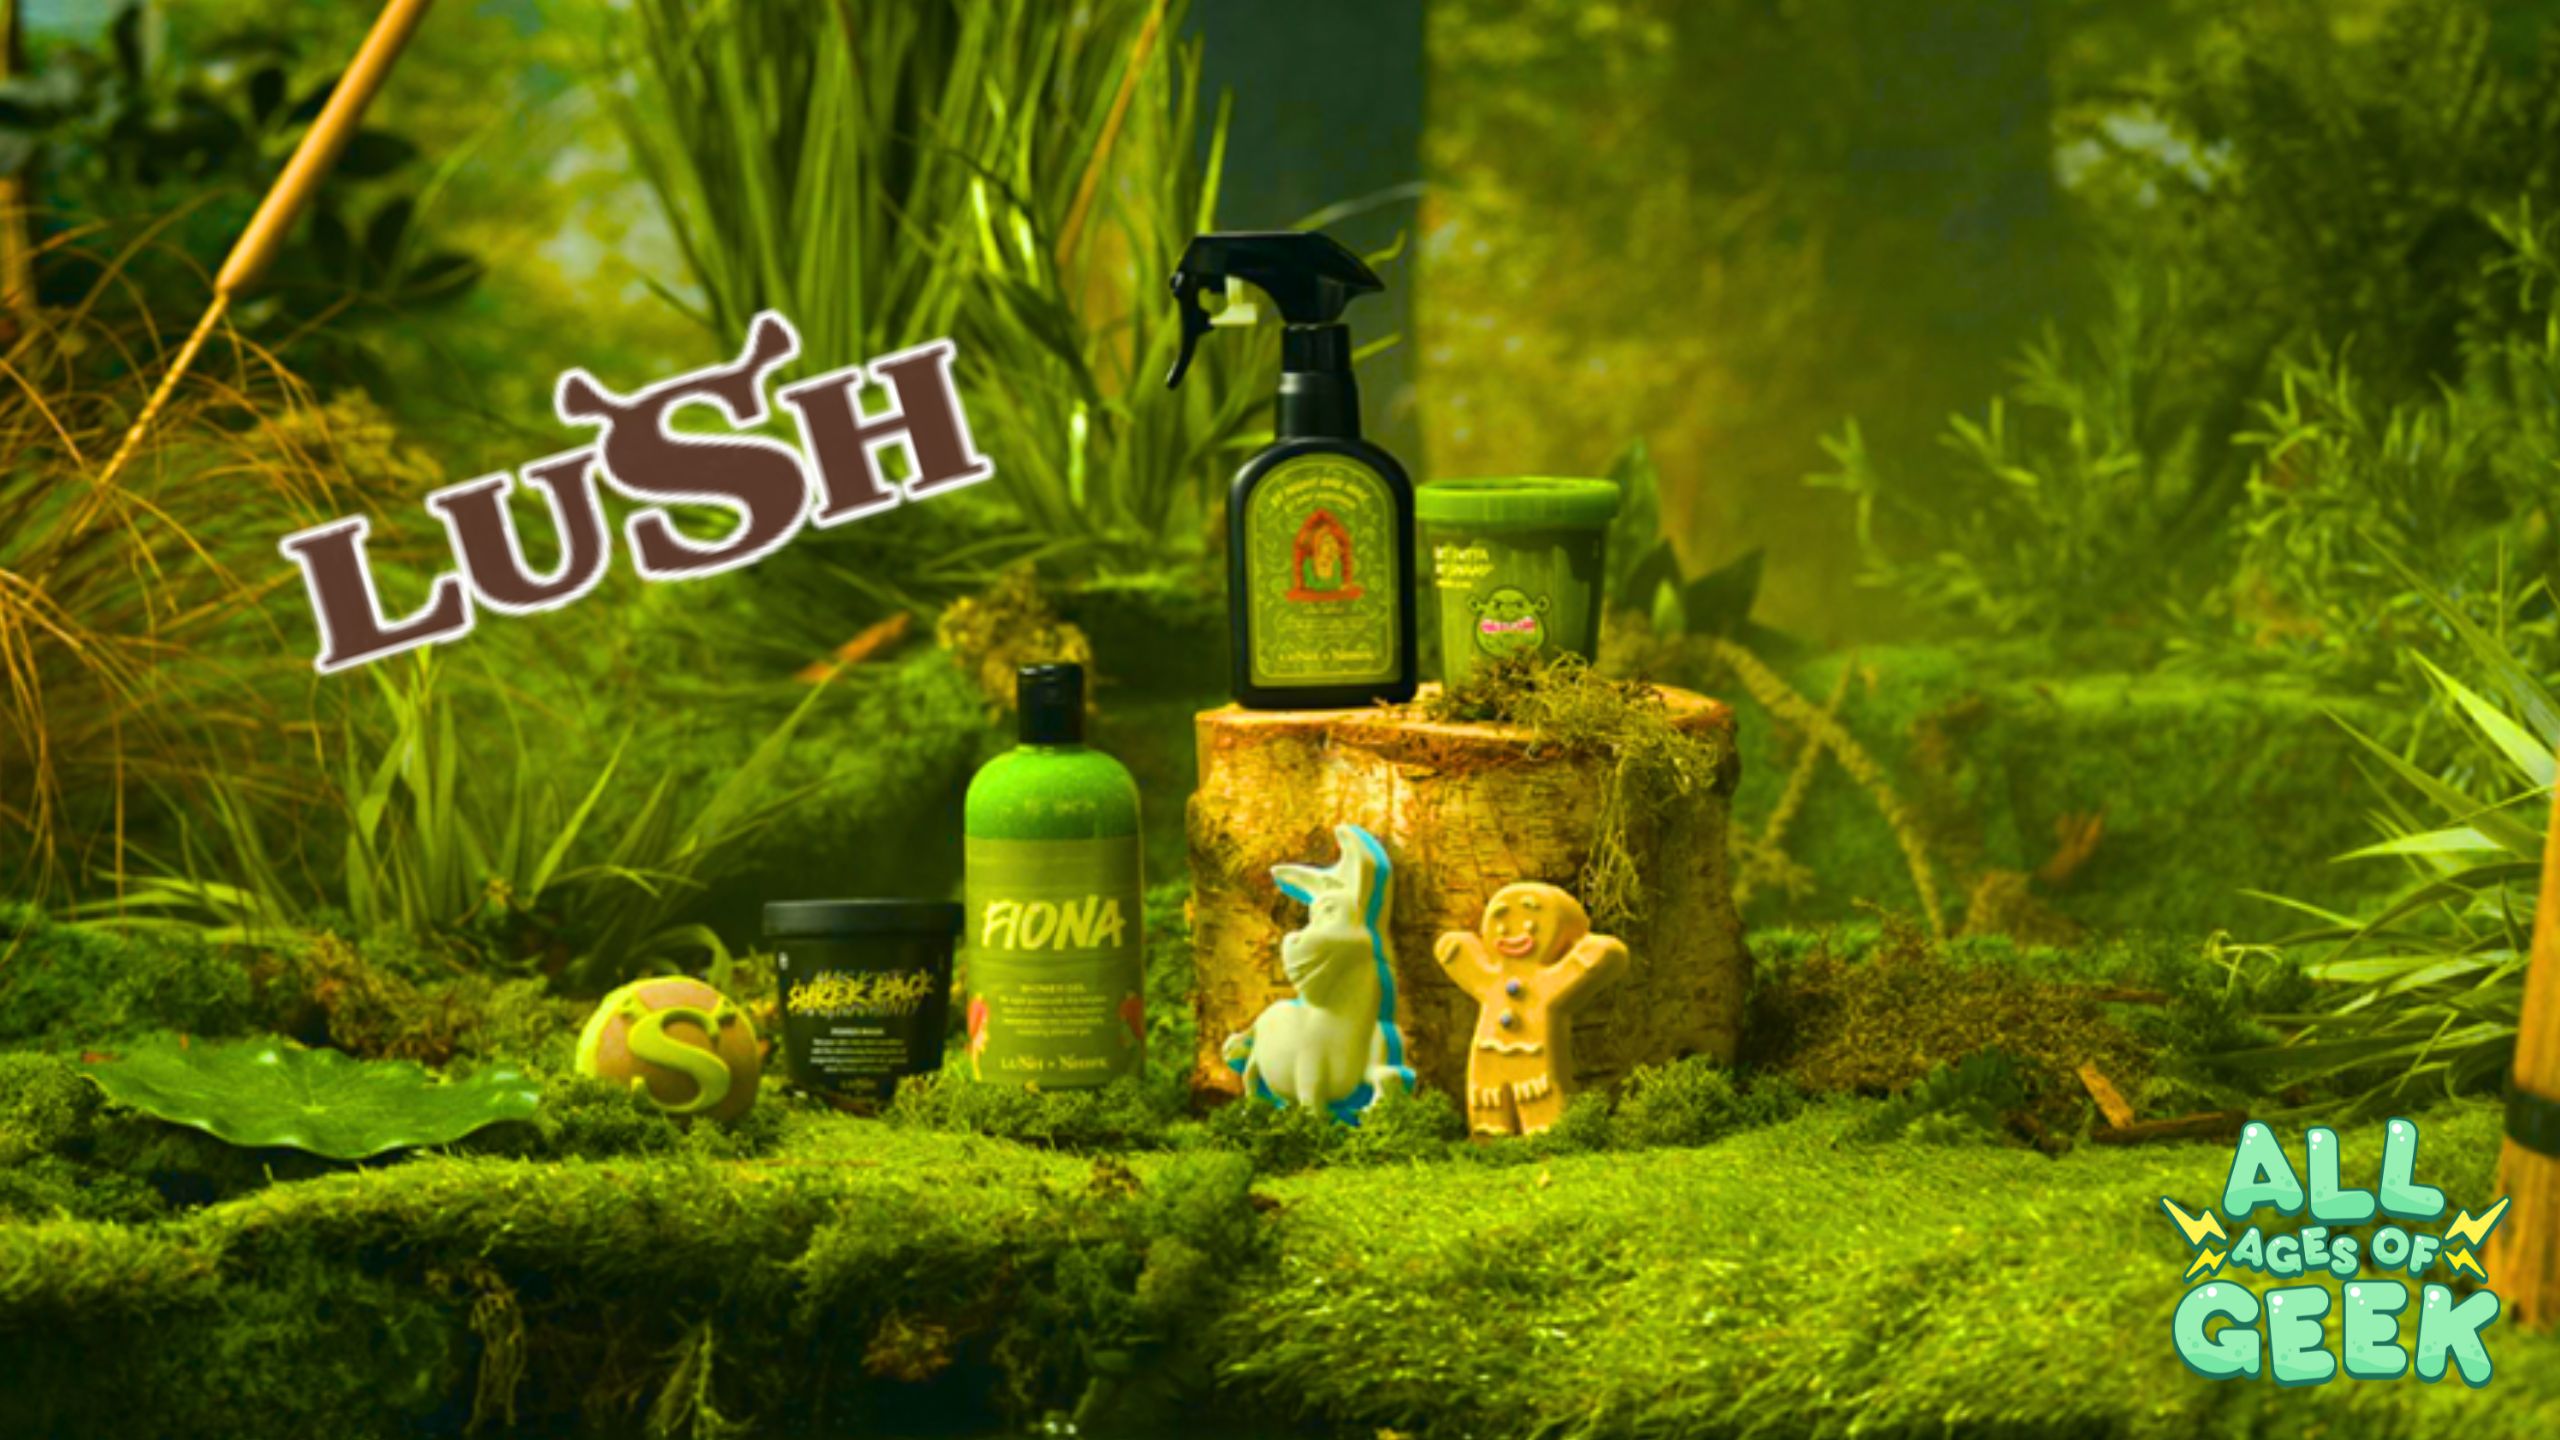 From Swamp to Tub: Lush’s Shrek-Inspired Collection Brings Ogre-Sized Fun!